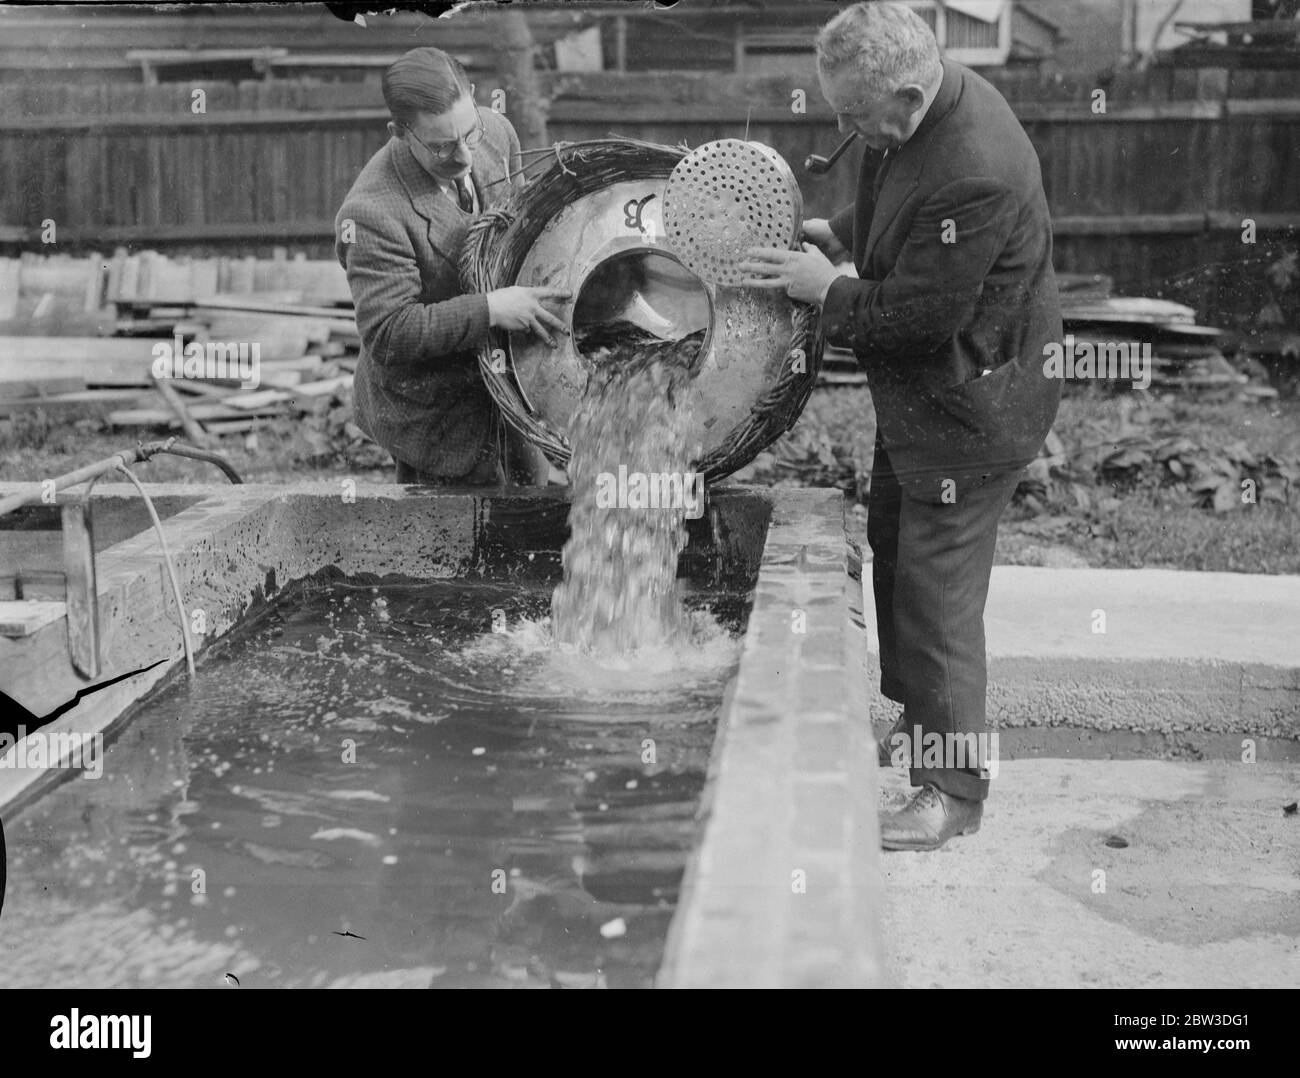 Keeping England on the goldfish standard . Thousands imported from Italy before sanctions . Unloading part of the days huge consignment of goldfish at an Alperton fisheries . 18 October 1935 Stock Photo